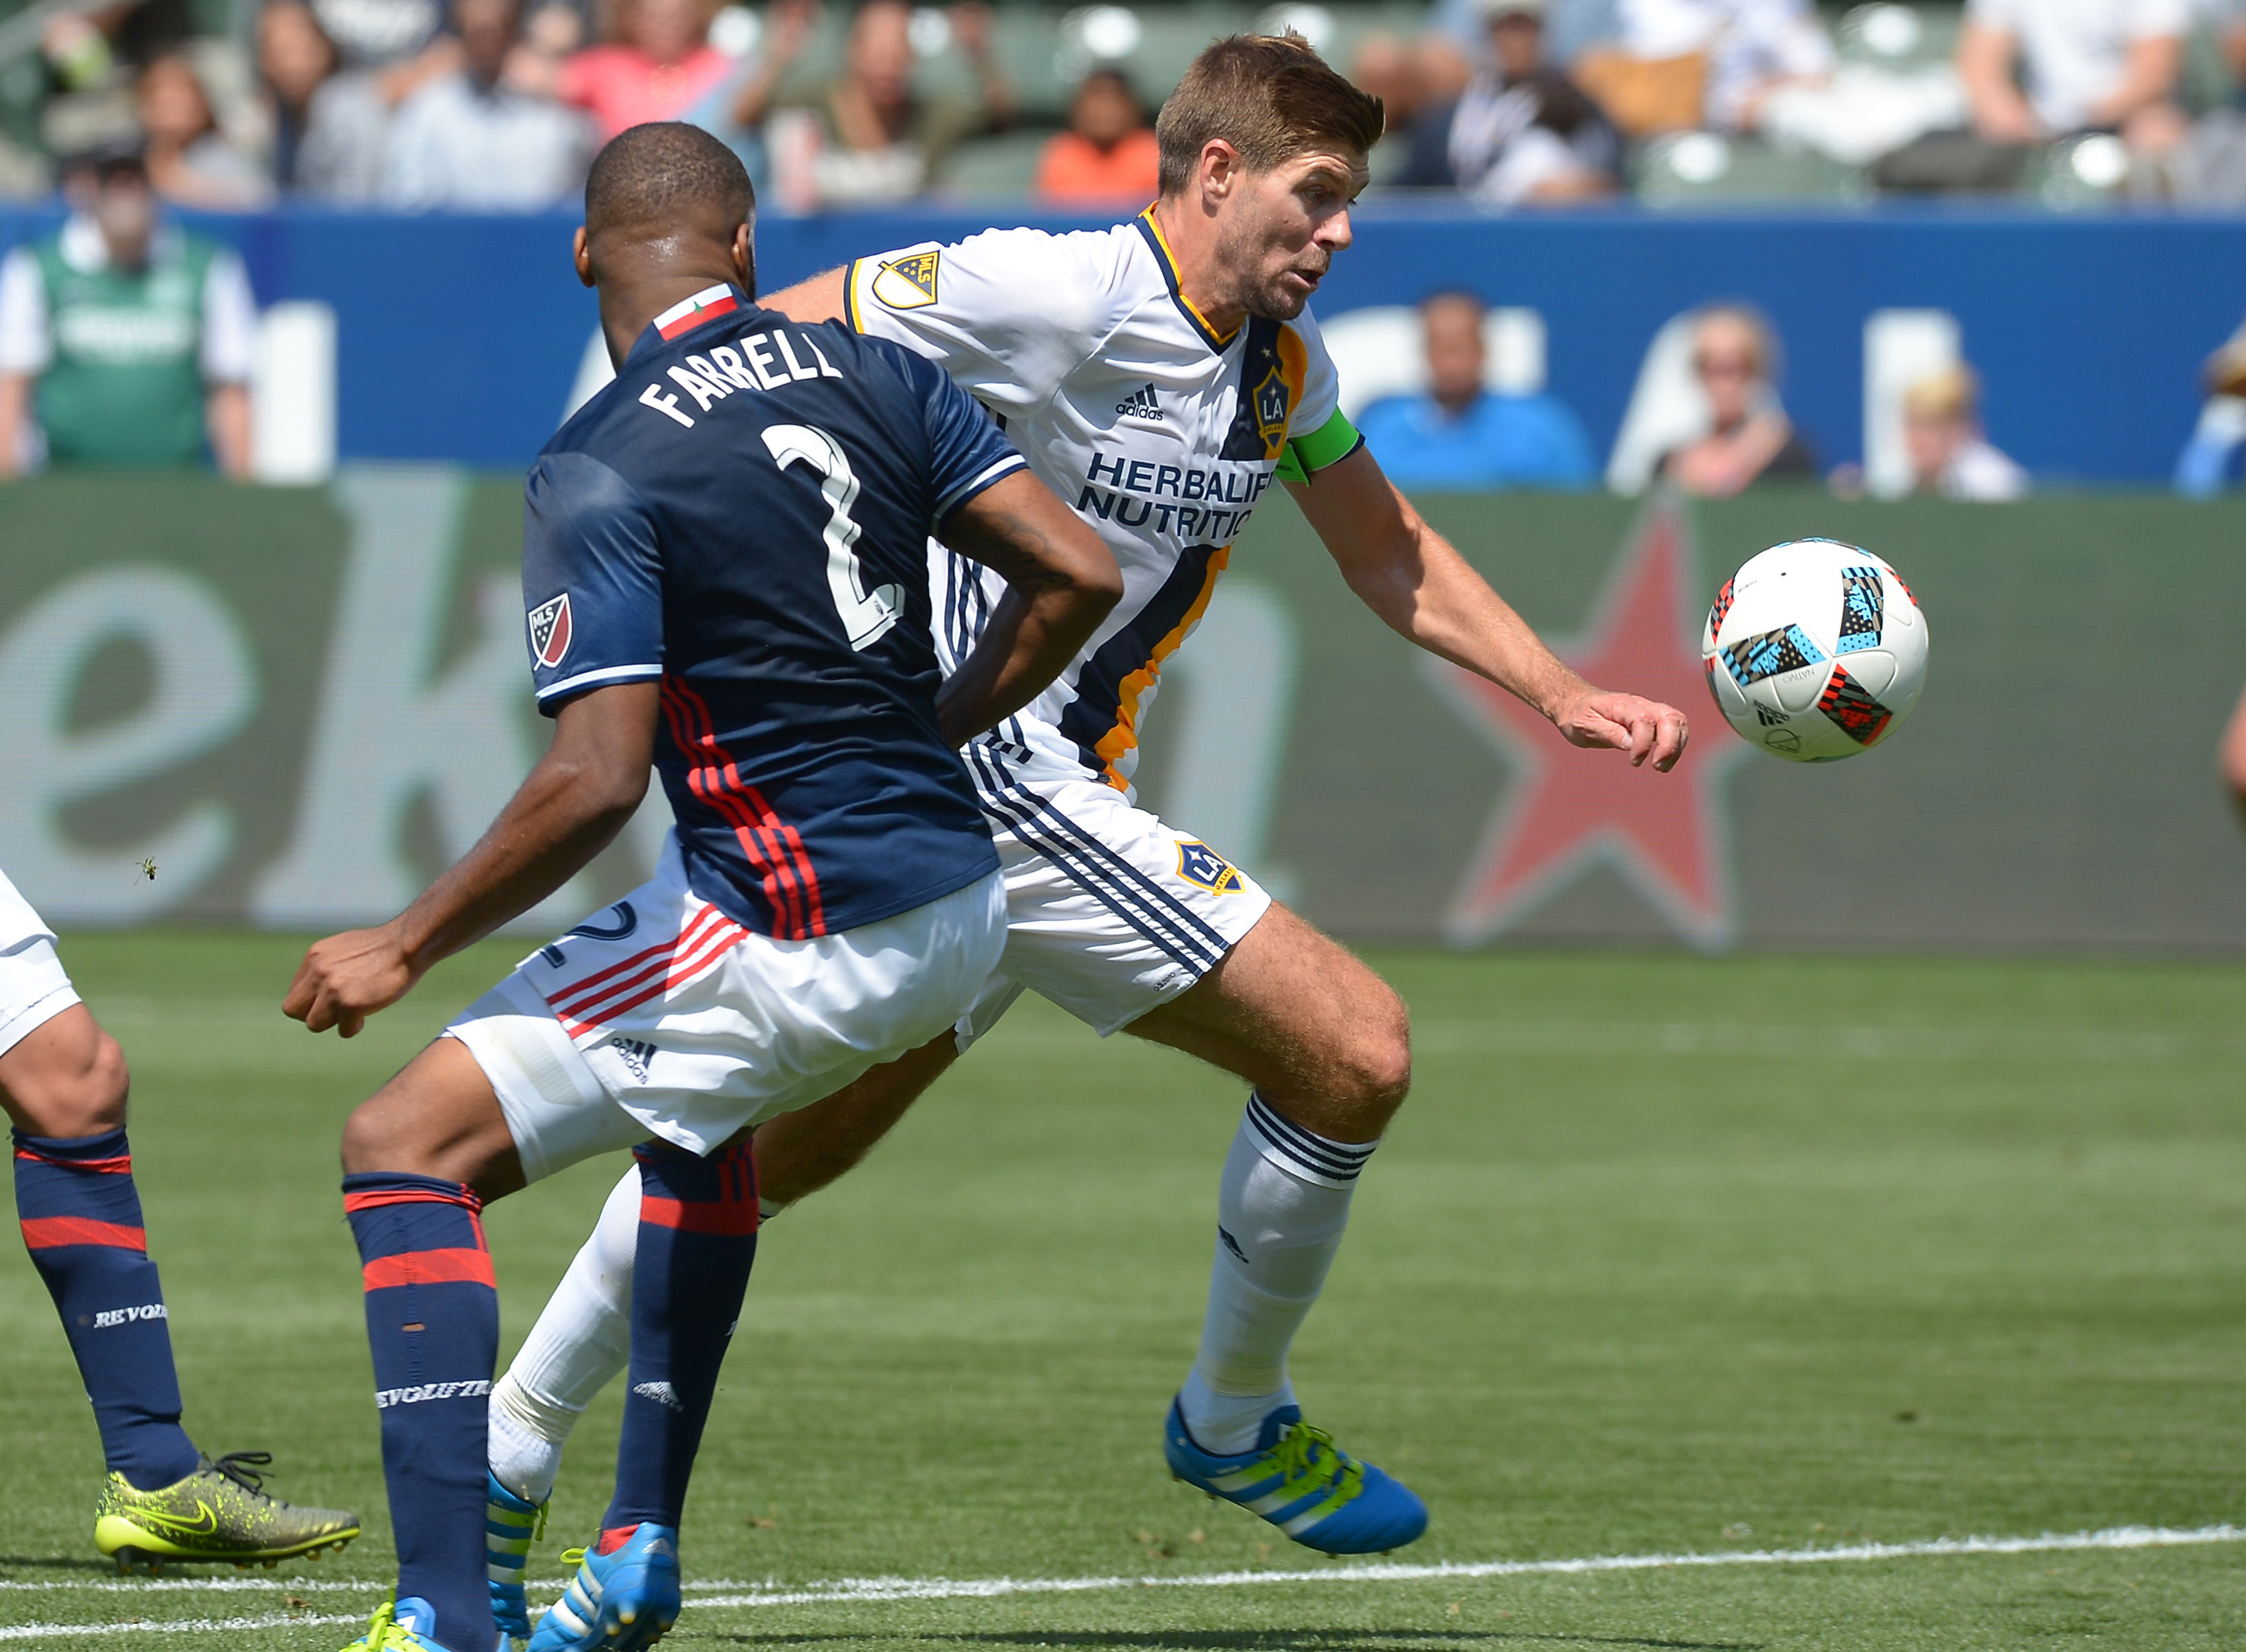 May 8, 2016; Carson, CA, USA; Los Angeles Galaxy midfielder Steven Gerrard (8) dribbles the ball past New England Revolution defender Andrew Farrell (2) to score a goal in the second half at StubHub Center. Galaxy won 4-2. Mandatory Credit: Jayne Kamin-Oncea-USA TODAY Sports